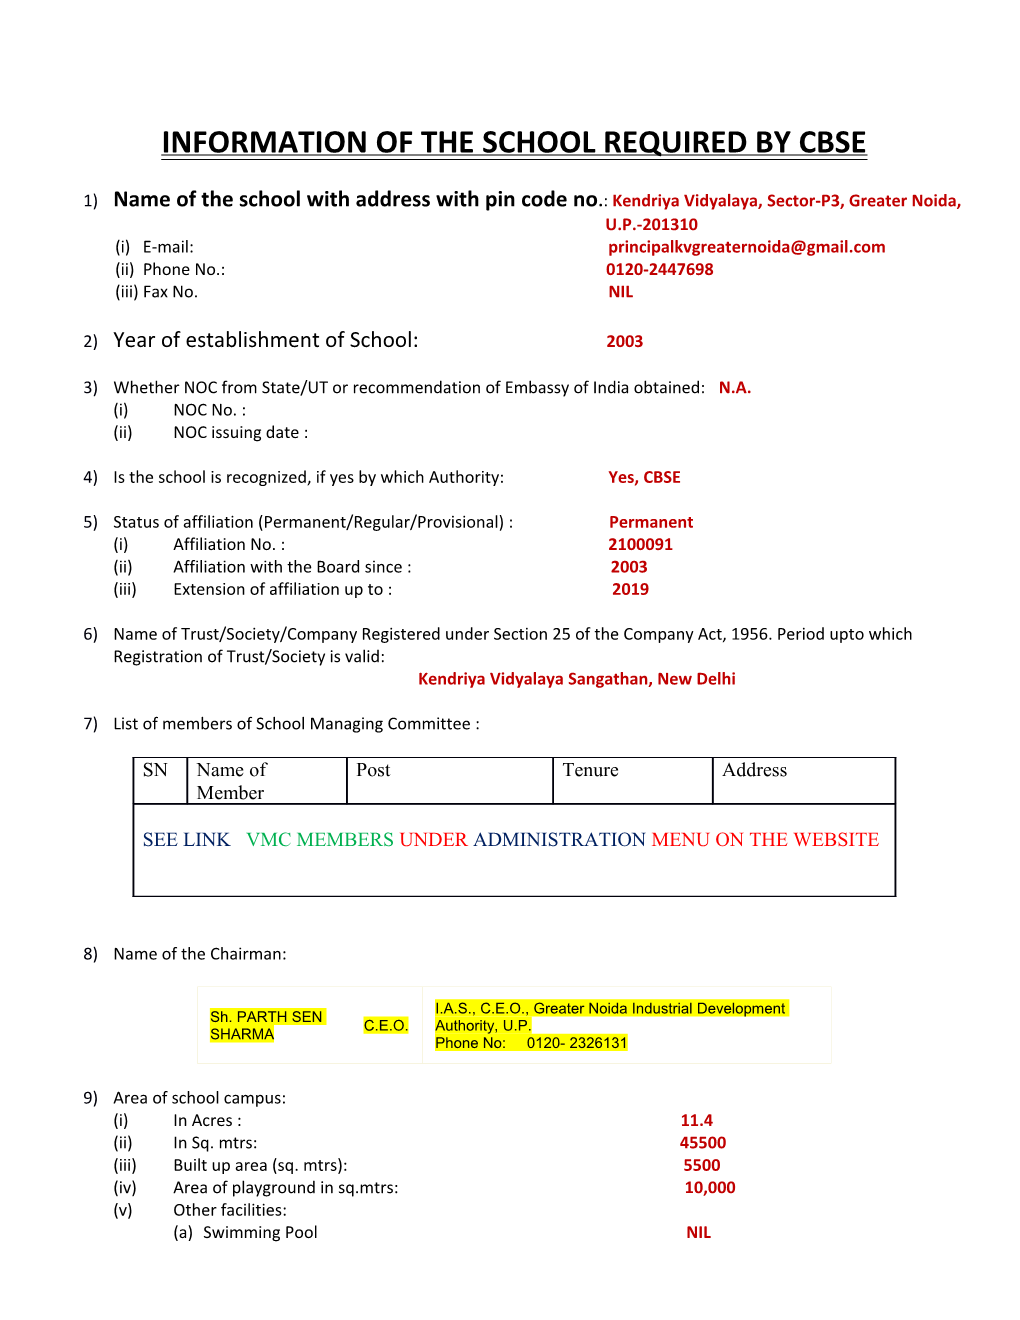 Information of the School Required by Cbse